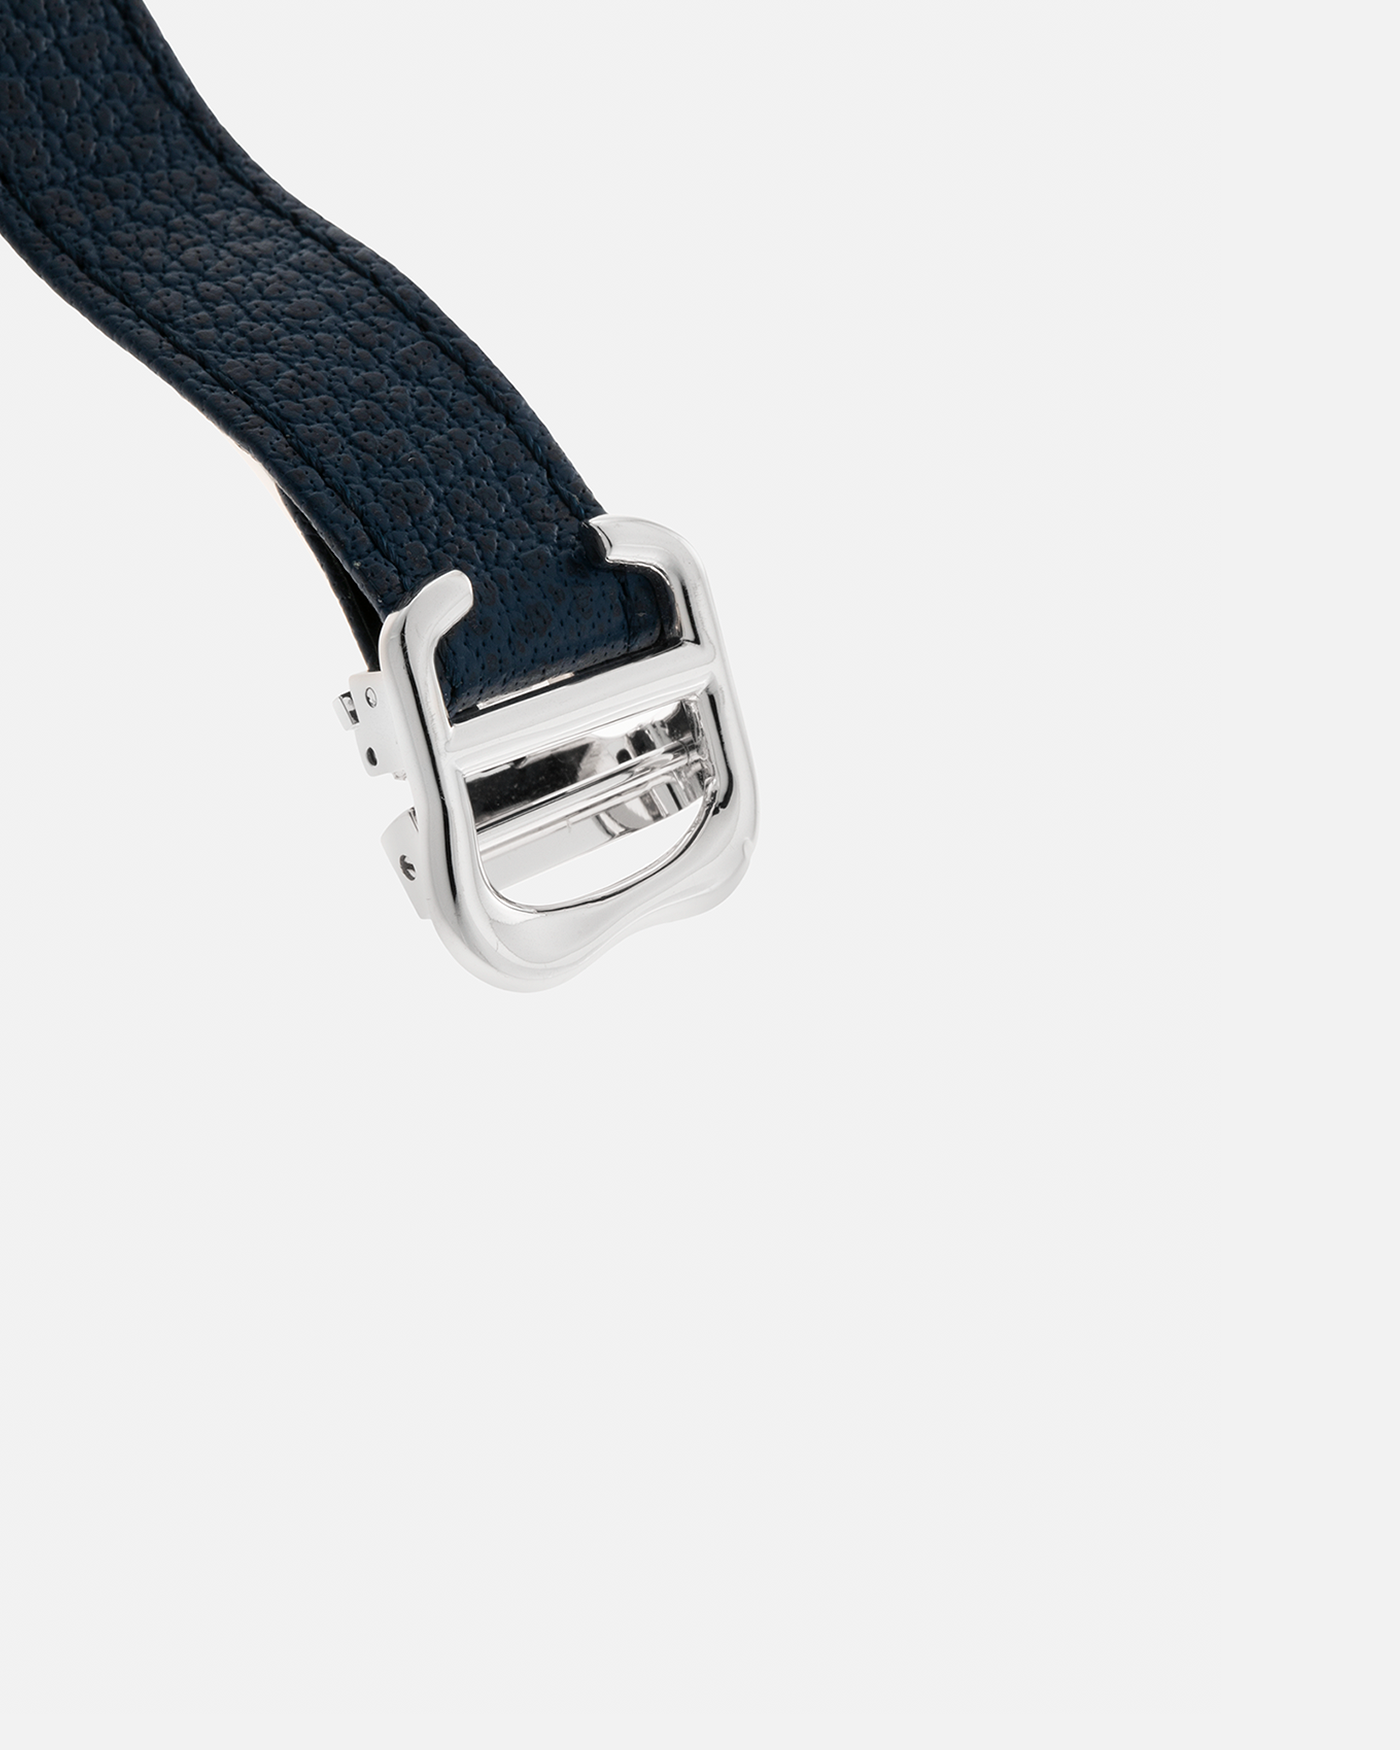 Brand: Cartier Year: 2022 Model: Crash Reference Number: WGCH0080, New Special Order Material: 18-carat White Gold (Rhodium Plated) Movement: Cartier Cal. 1917 MC, Manual-Winding Case Dimensions: 42mm x 24mm (Asymmetrical Case) Strap: Cartier Navy Blue Alligator Strap with Signed 18-carat White Gold ‘Crash’ Deployant Buckle